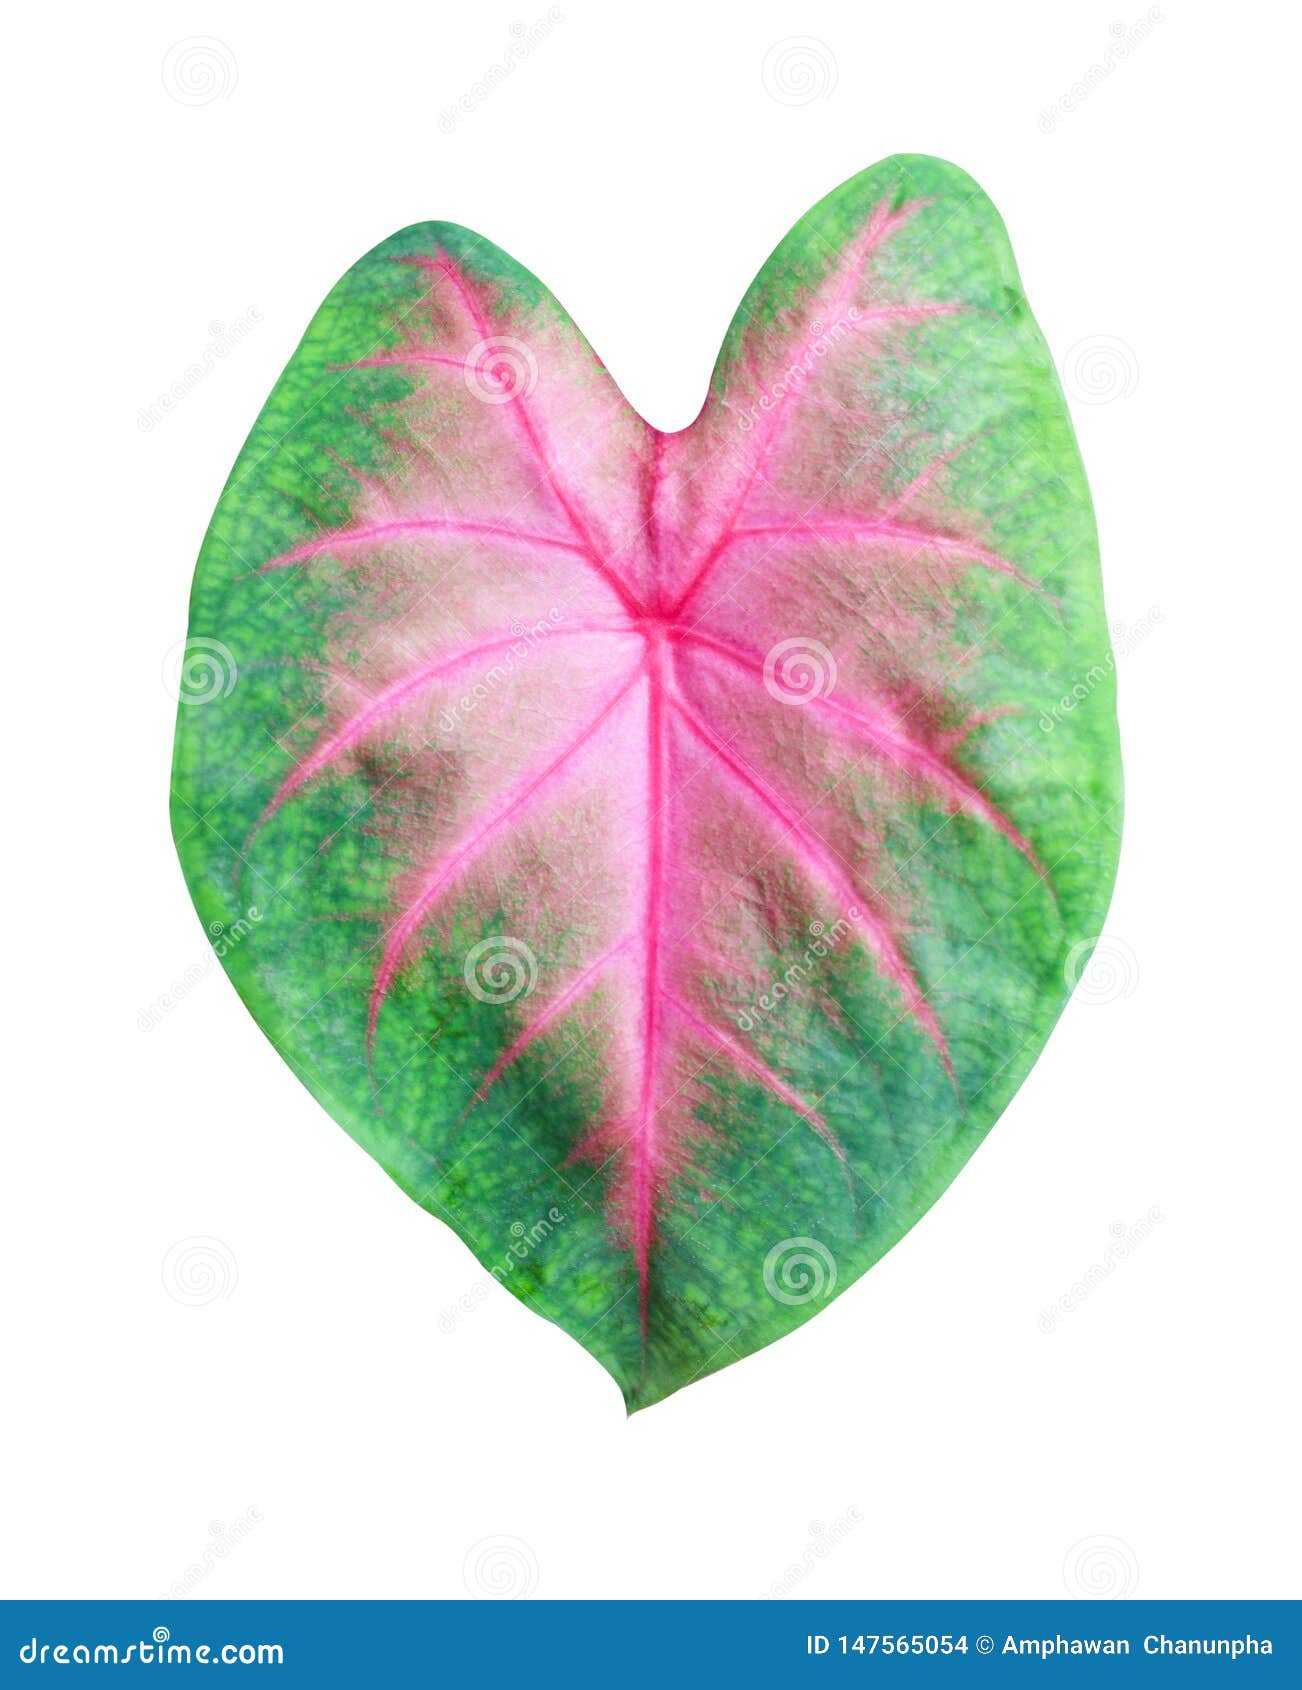 Heart Shaped Leaves Patterns Texture , Colorful Nature Queen of the